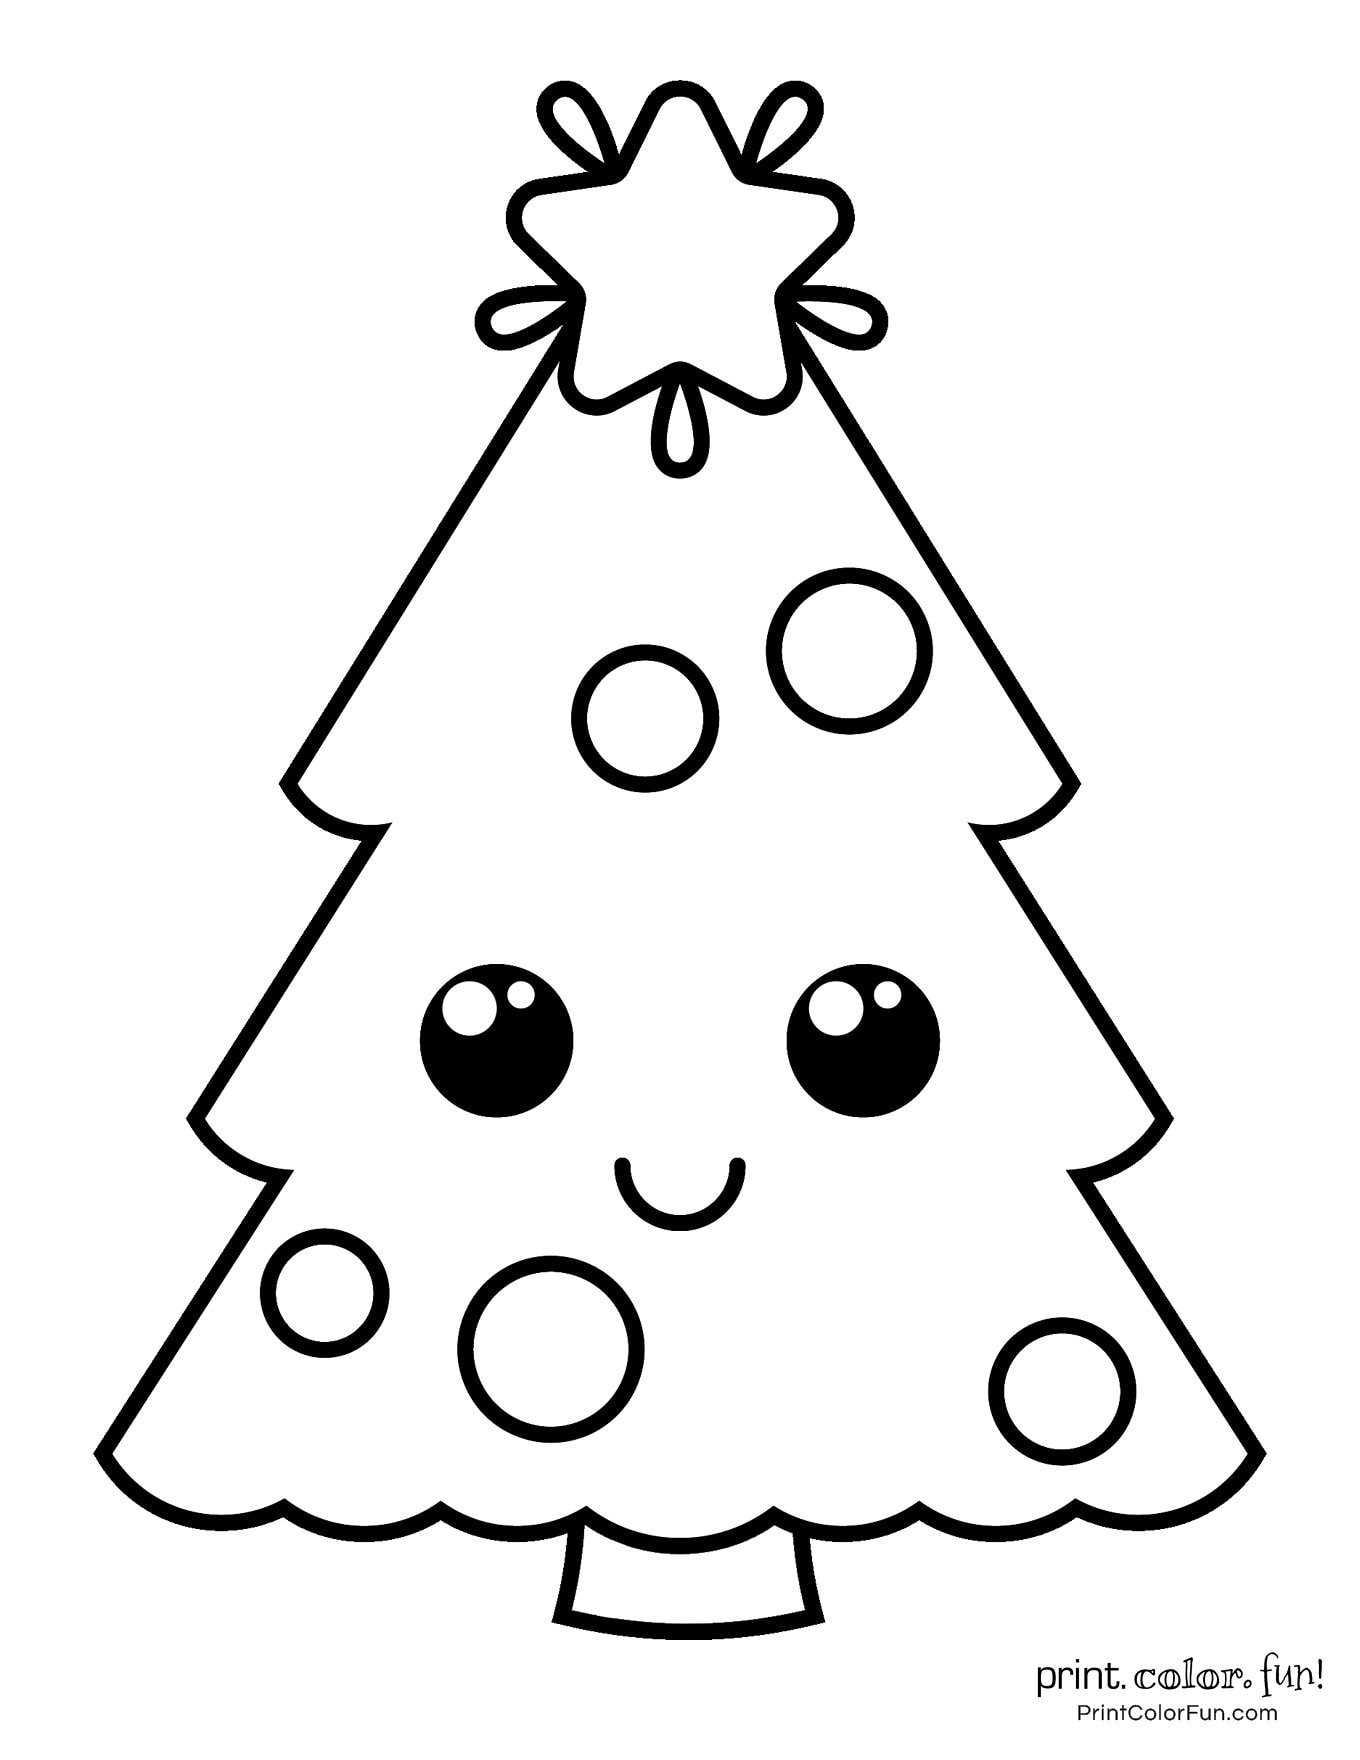 Top 100 Christmas tree coloring pages The ultimate (free!) printable